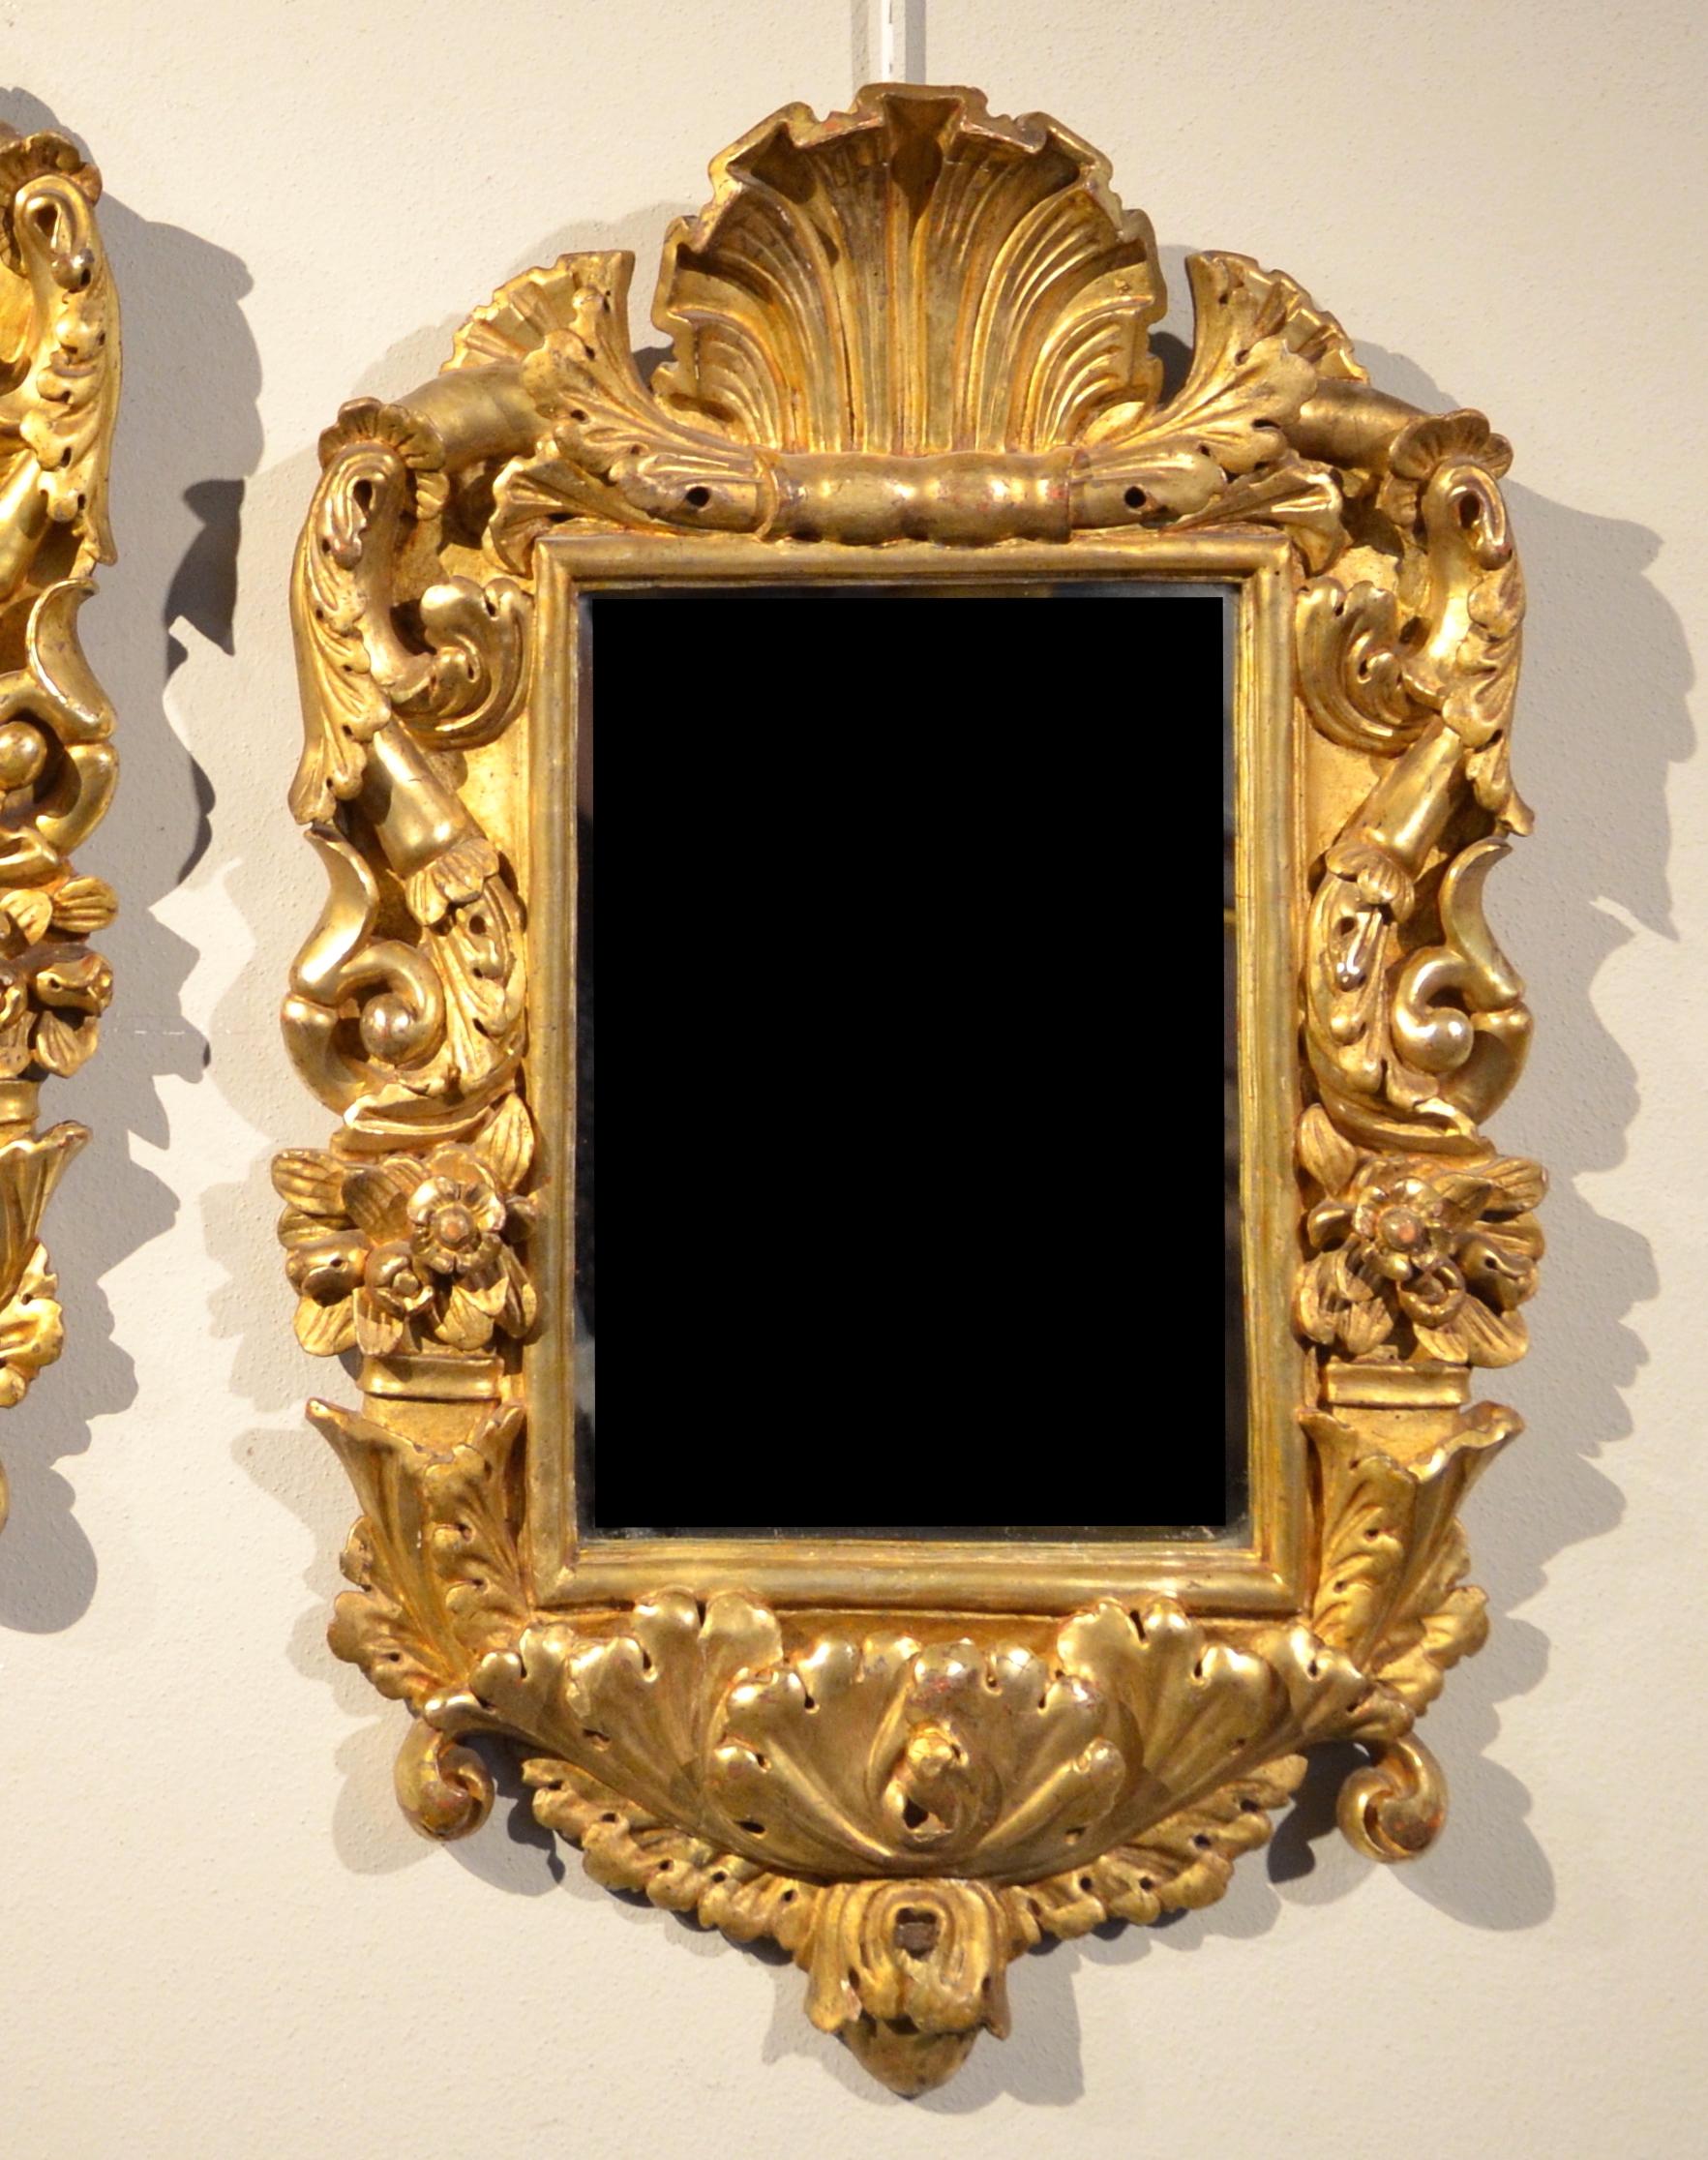 Magnificent pair of mirrors
Italy, Genoa
Second half 700

Carved and gilded wood
Antique mirrors in silver mercury glass
Dimensions: cm. 73 x 46.5

Pair of mirrors of Ligurian manufacture, Genoese in particular, in richly carved and gilded wood,